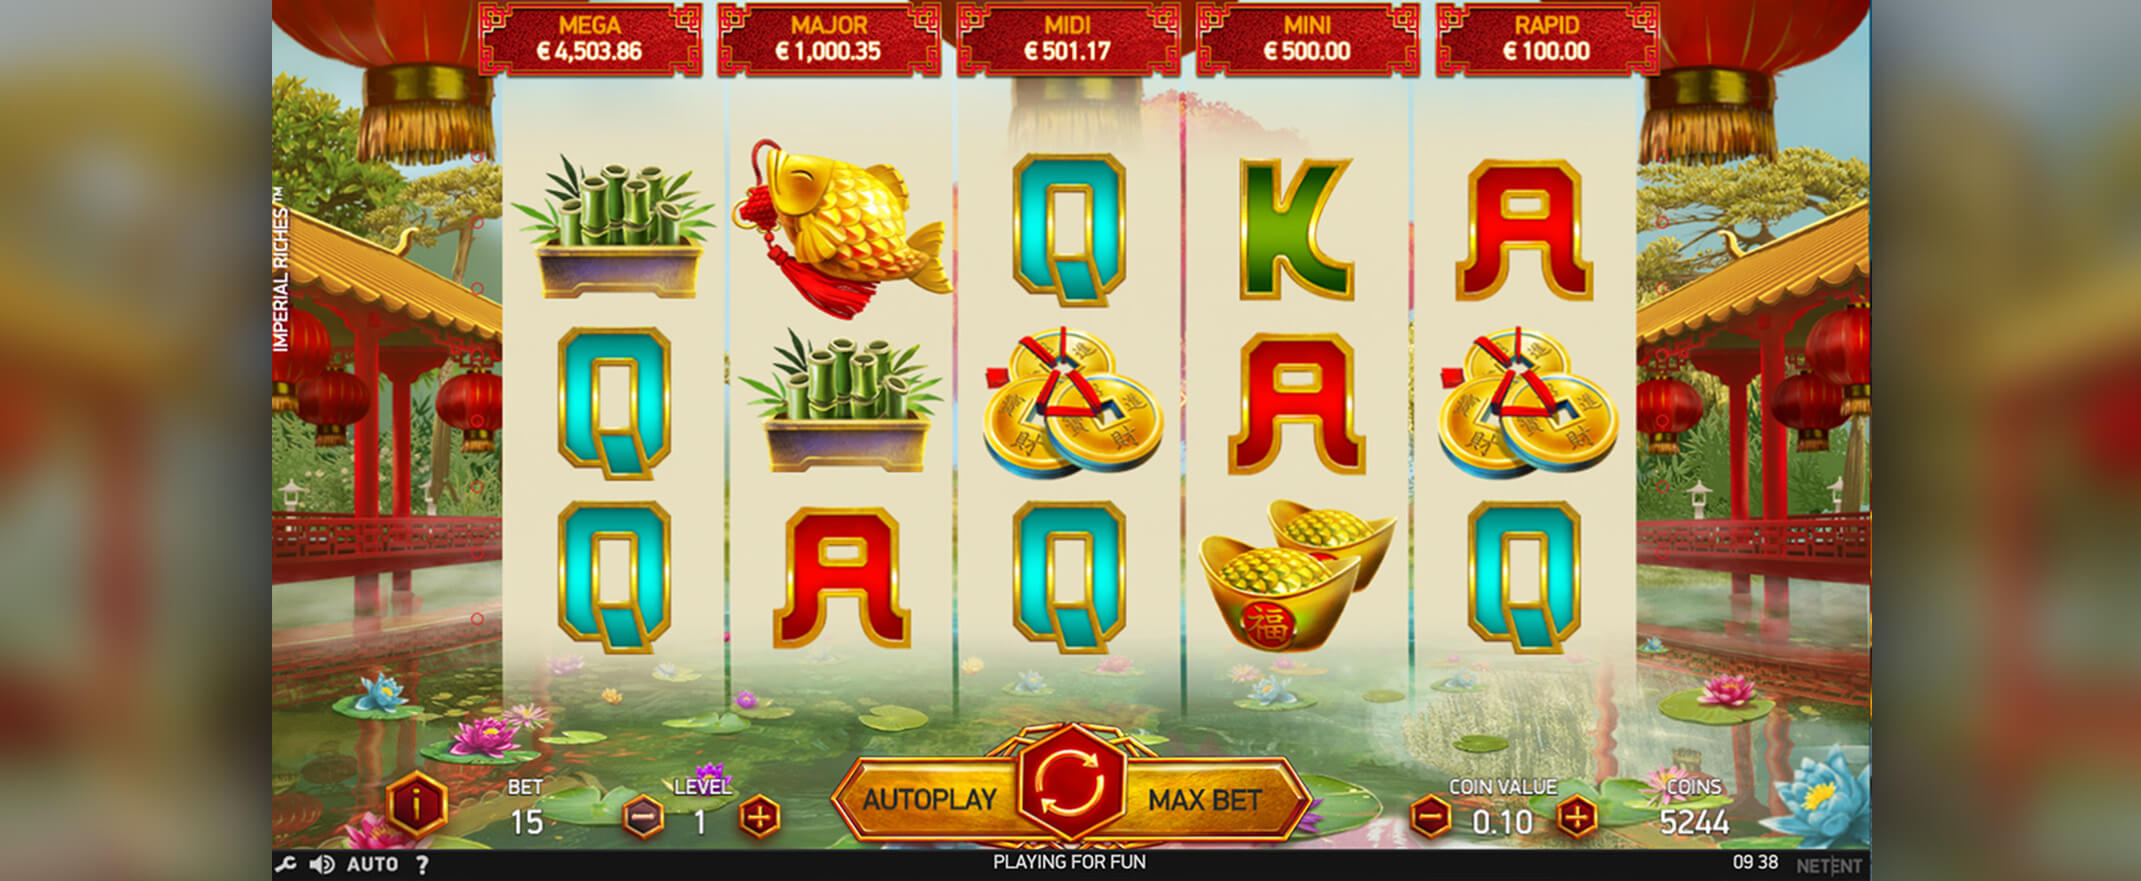 Imperial Riches video slot from NetEnt